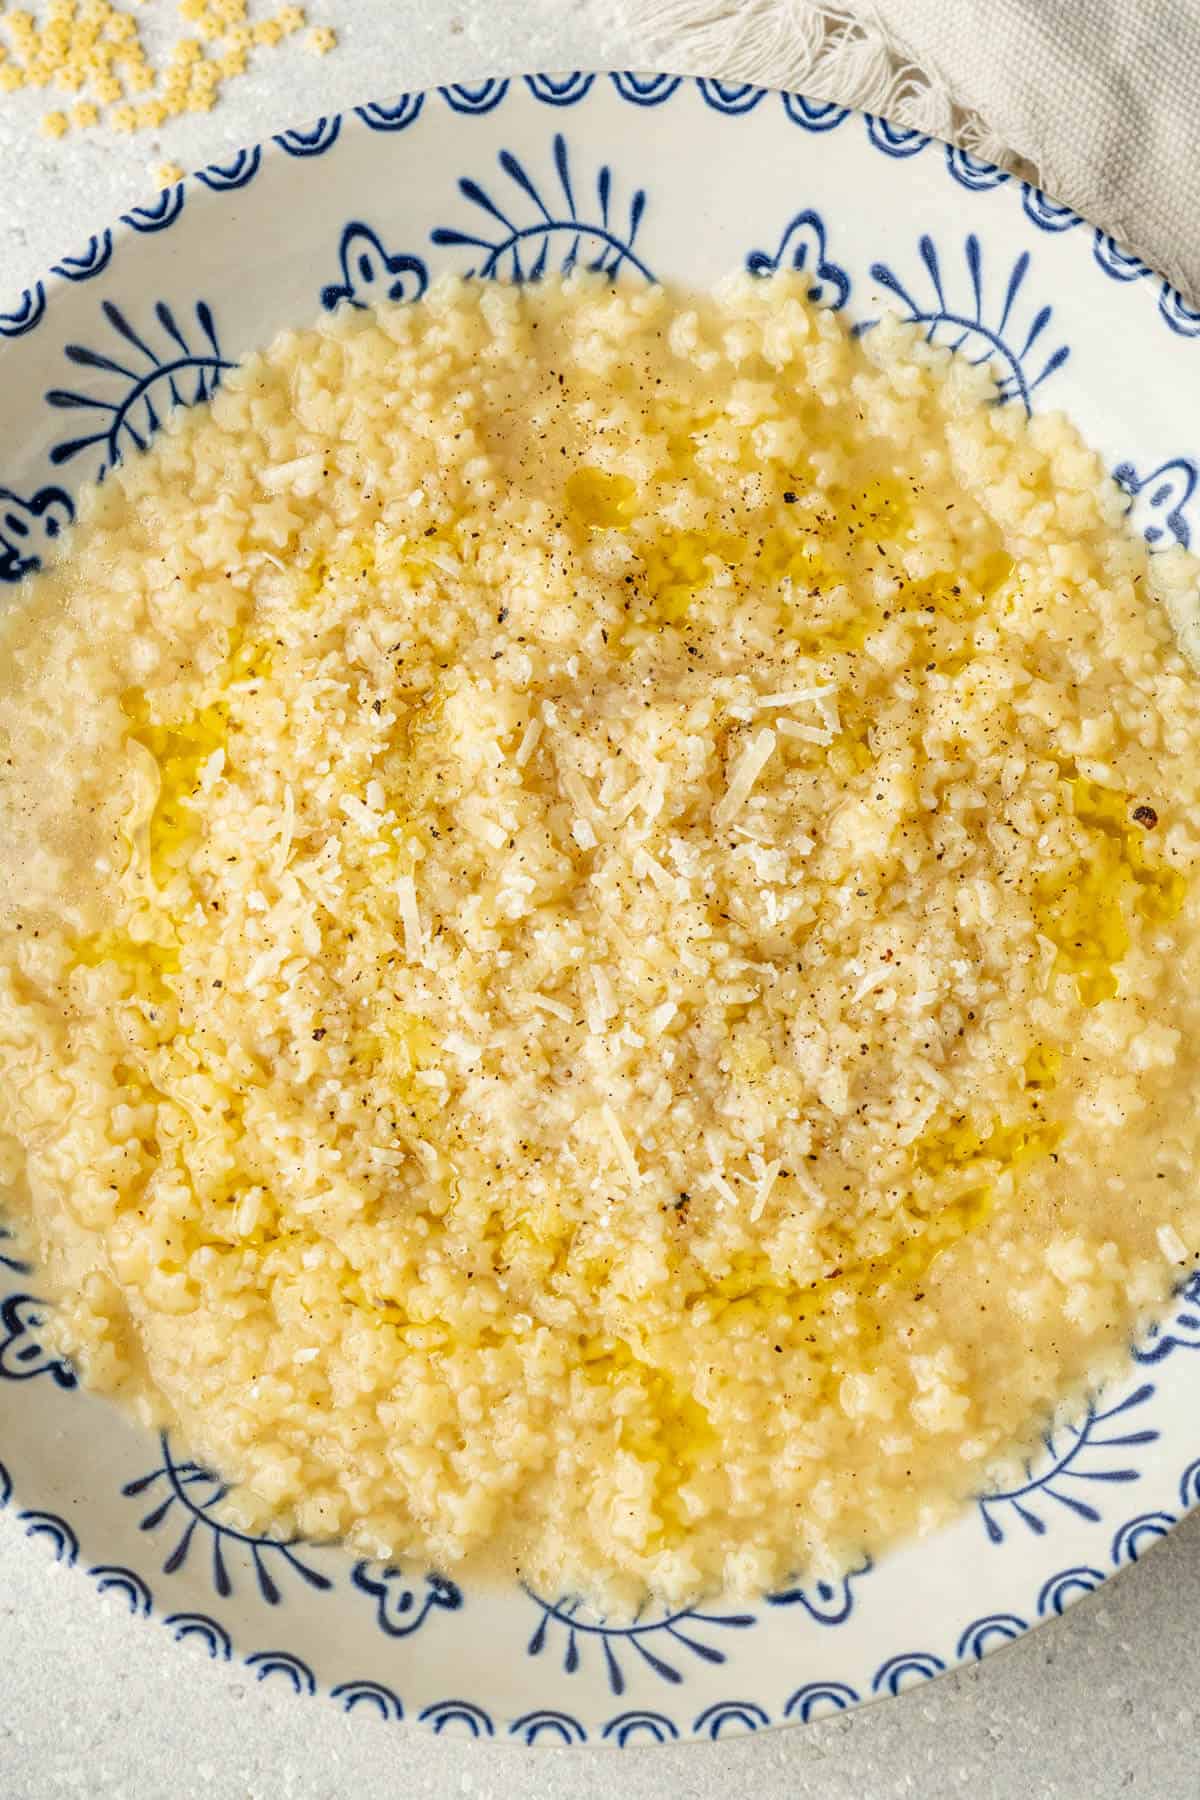 Pastina served in a bowl topped with parmesan, black pepper and drizzle of olive oil